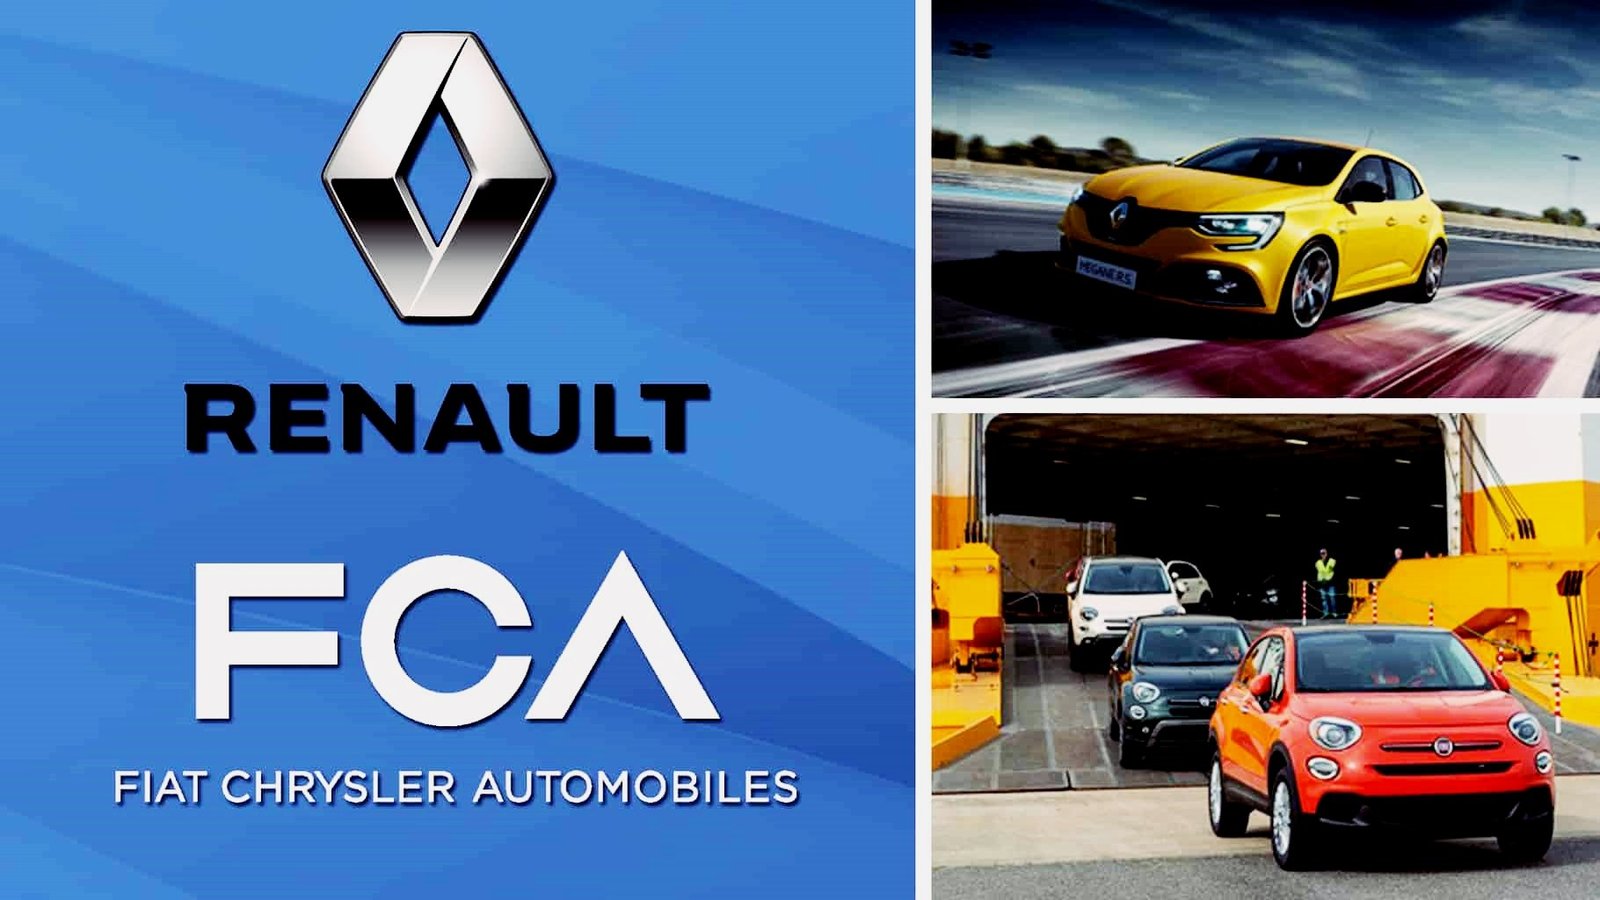 Fiat Chrysler Automobiles (FCA) : History and Facts